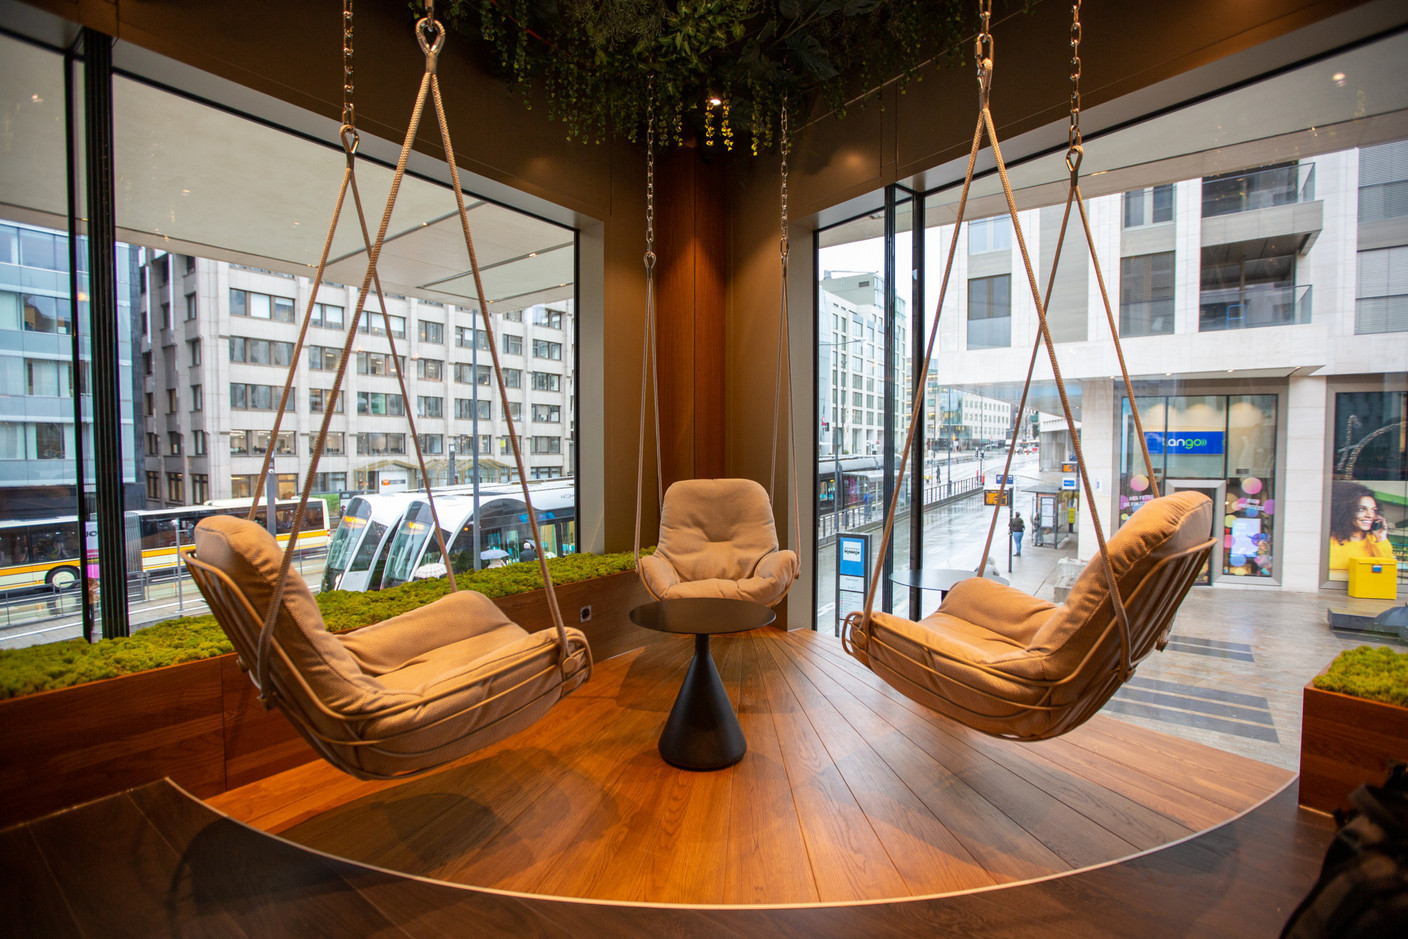 The swings offer a special view of the restaurant's surroundings. (Photo: Romain Gamba/Maison Moderne)